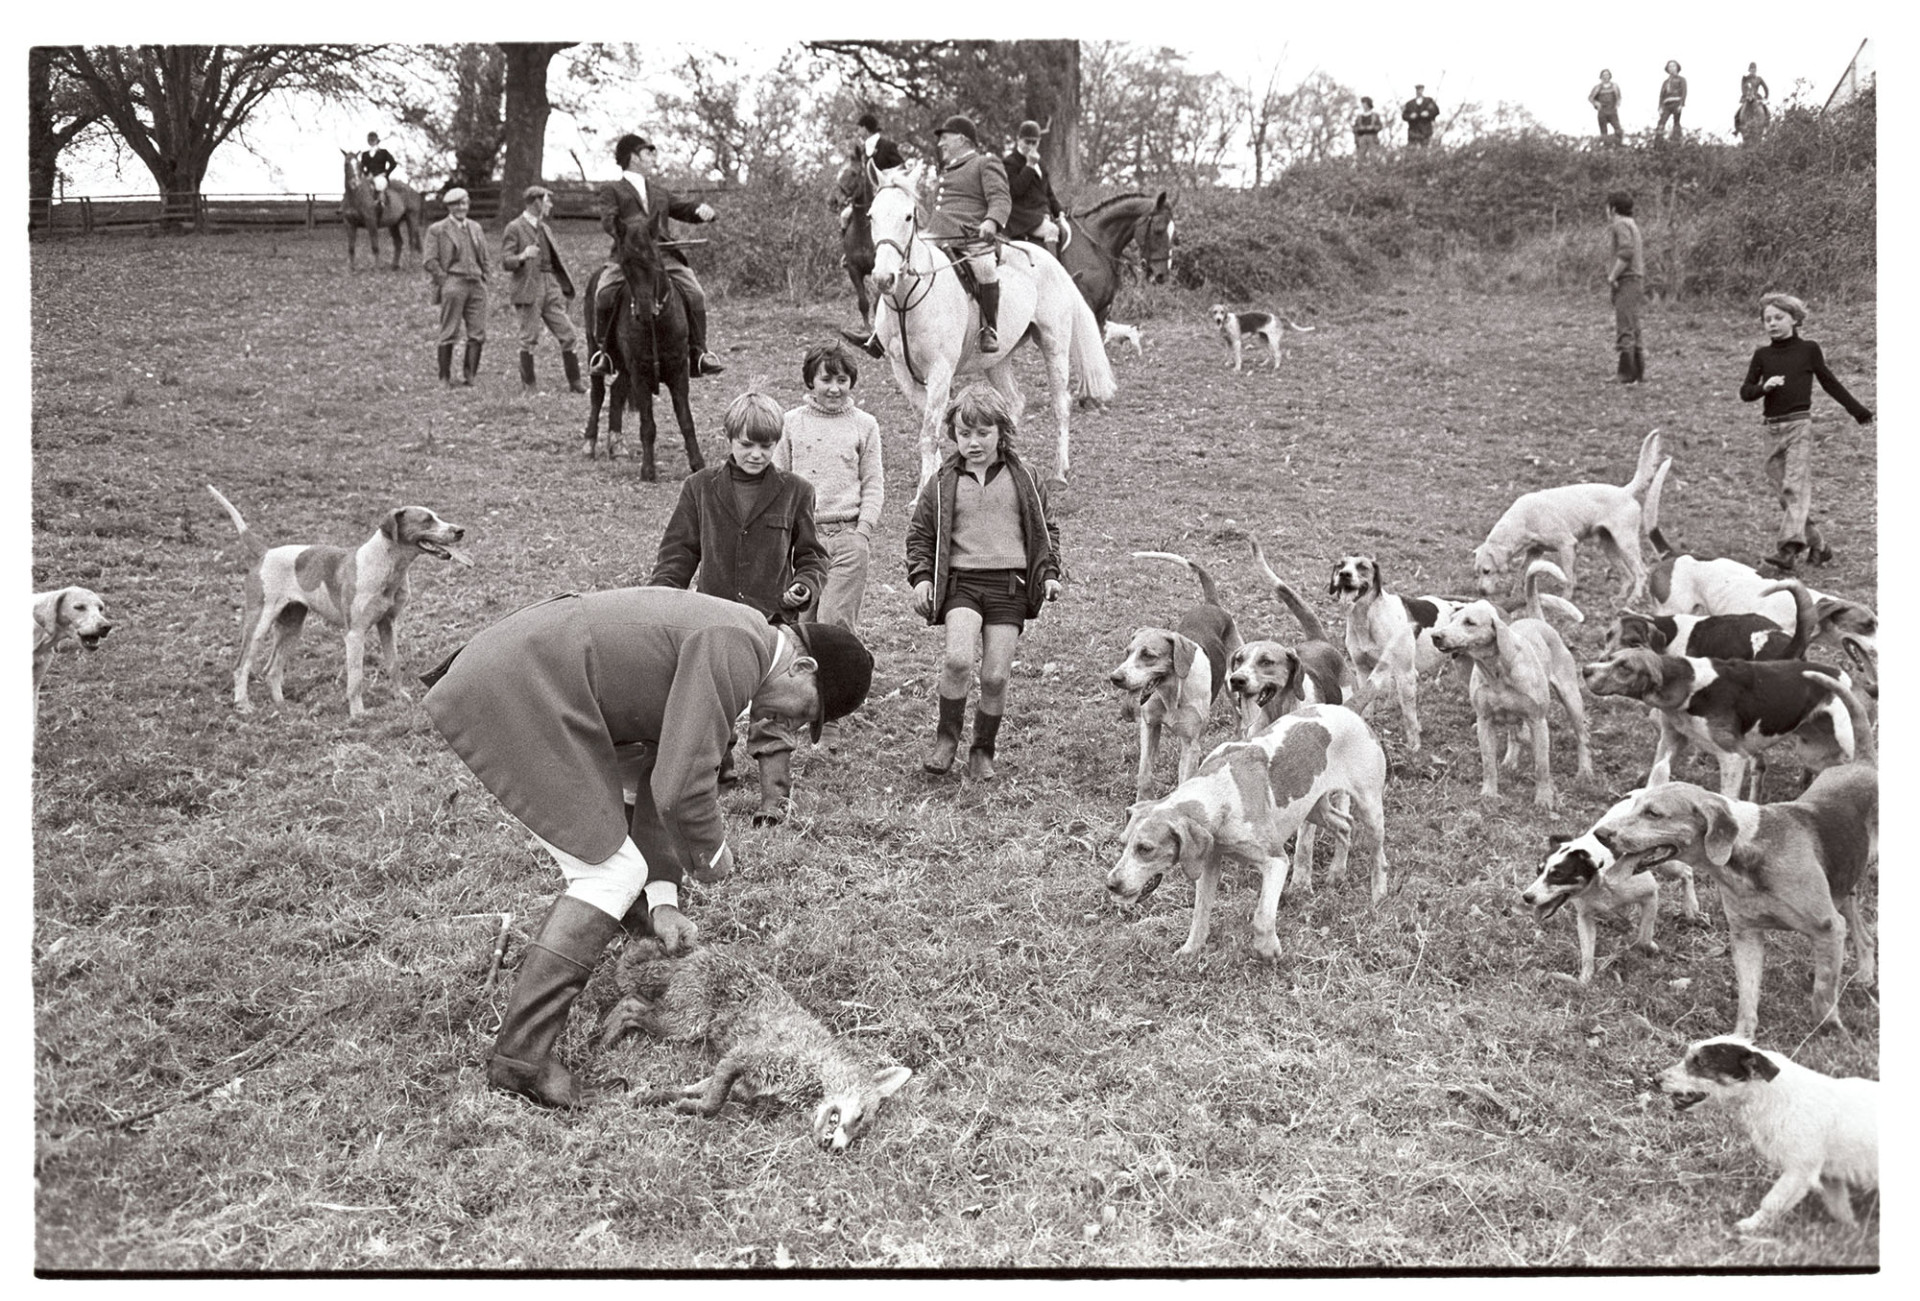 Huntsman cutting off fox's tail.
[A huntsman from Torrington Farmer's Hunt cutting off a fox's tail in a field near Hatherleigh. Children are watching and other huntsmen are in the background, including Frank Heal, Master of the Hunt.]